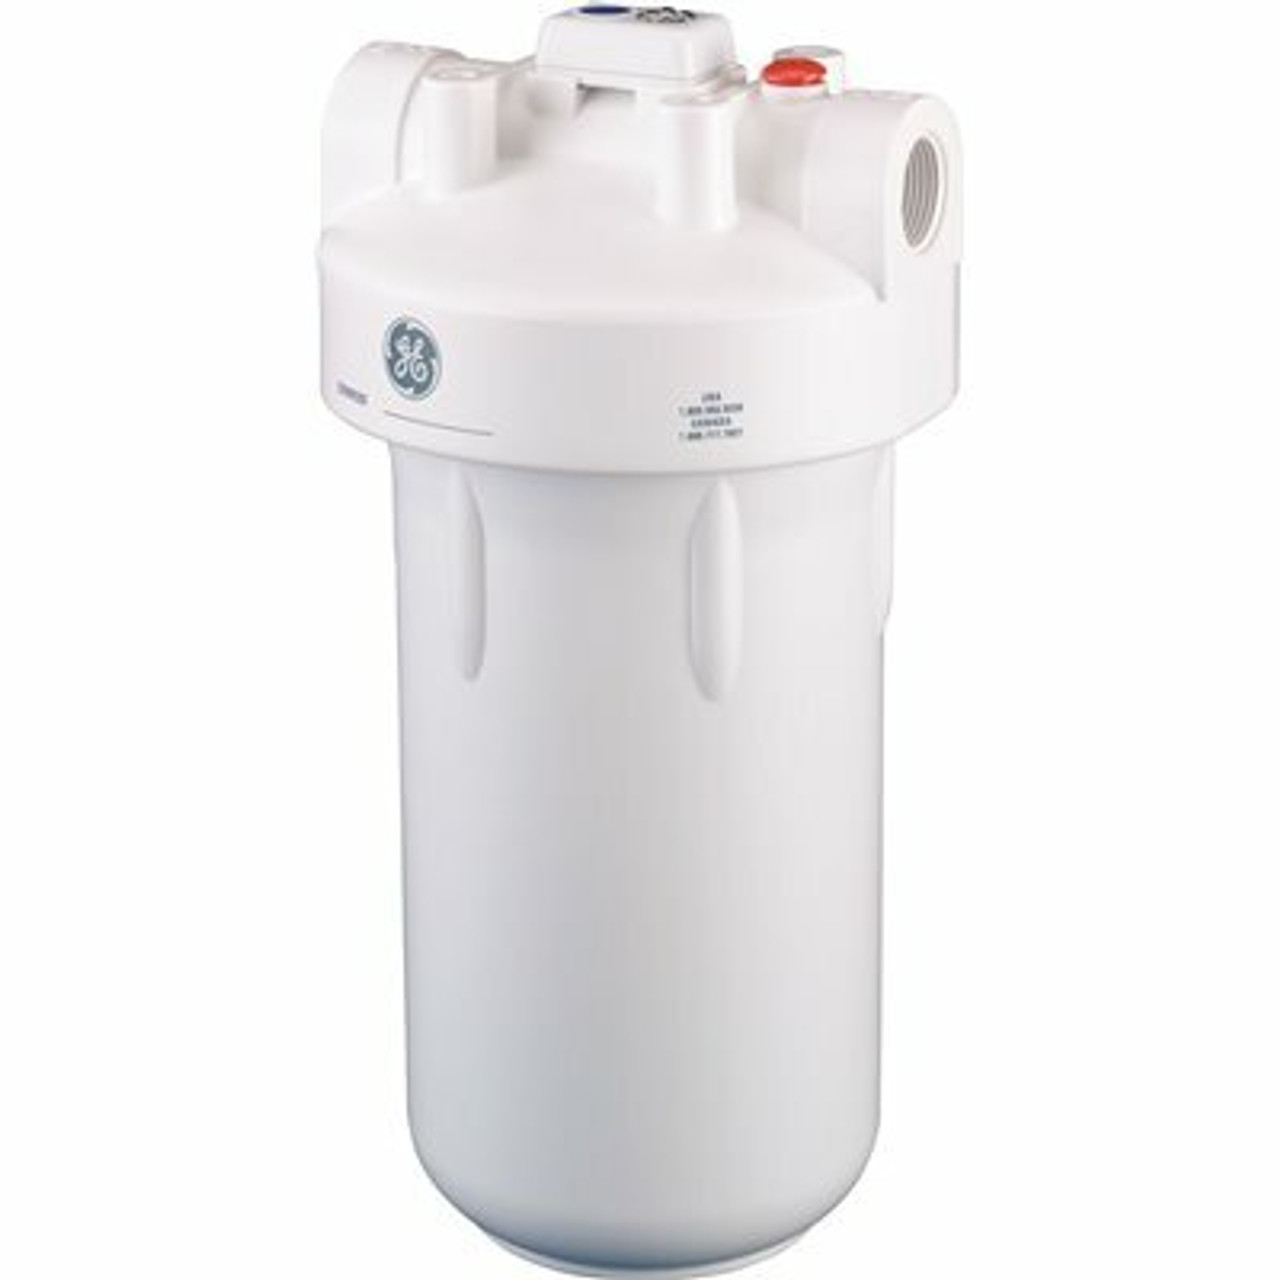 Ge Whole House Water Filtration System - 3553769